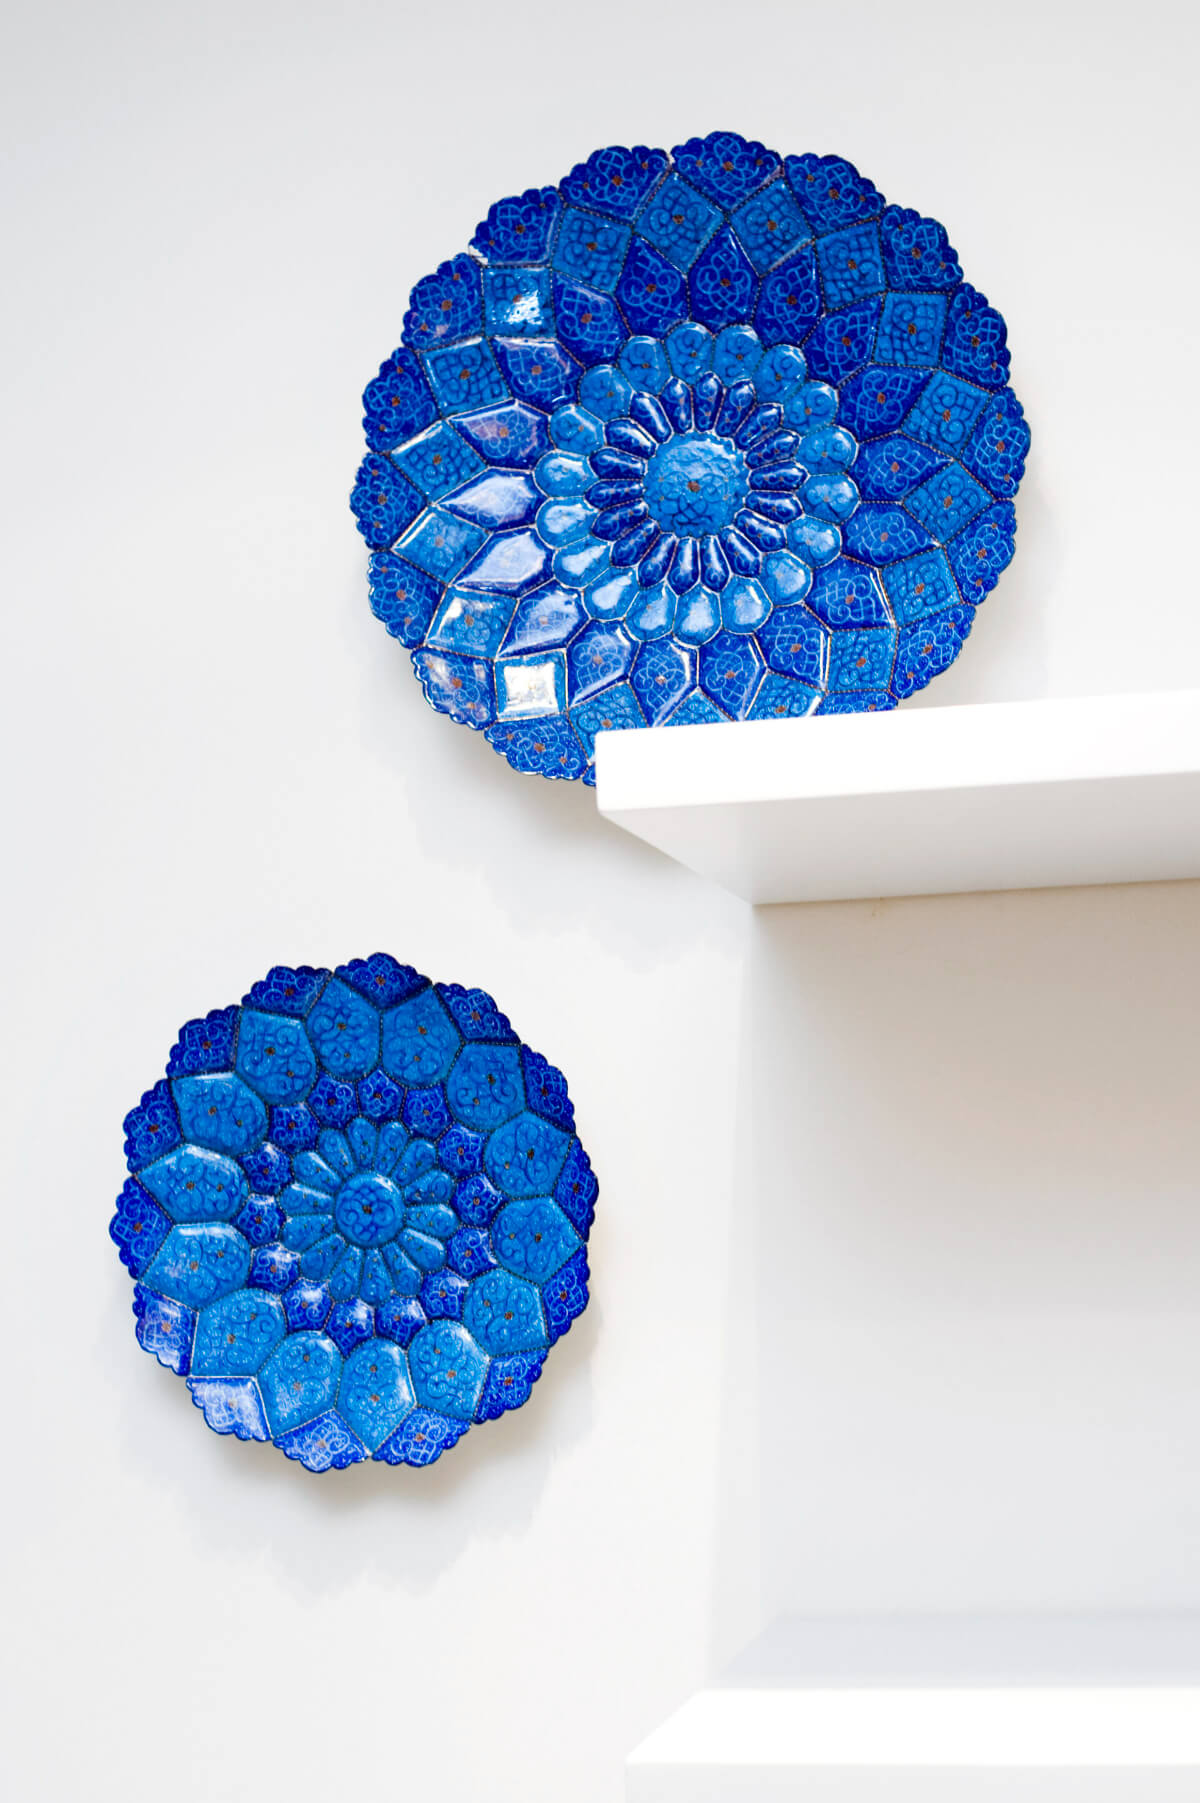 Blue Floral Pattern Plates Hung on Walls